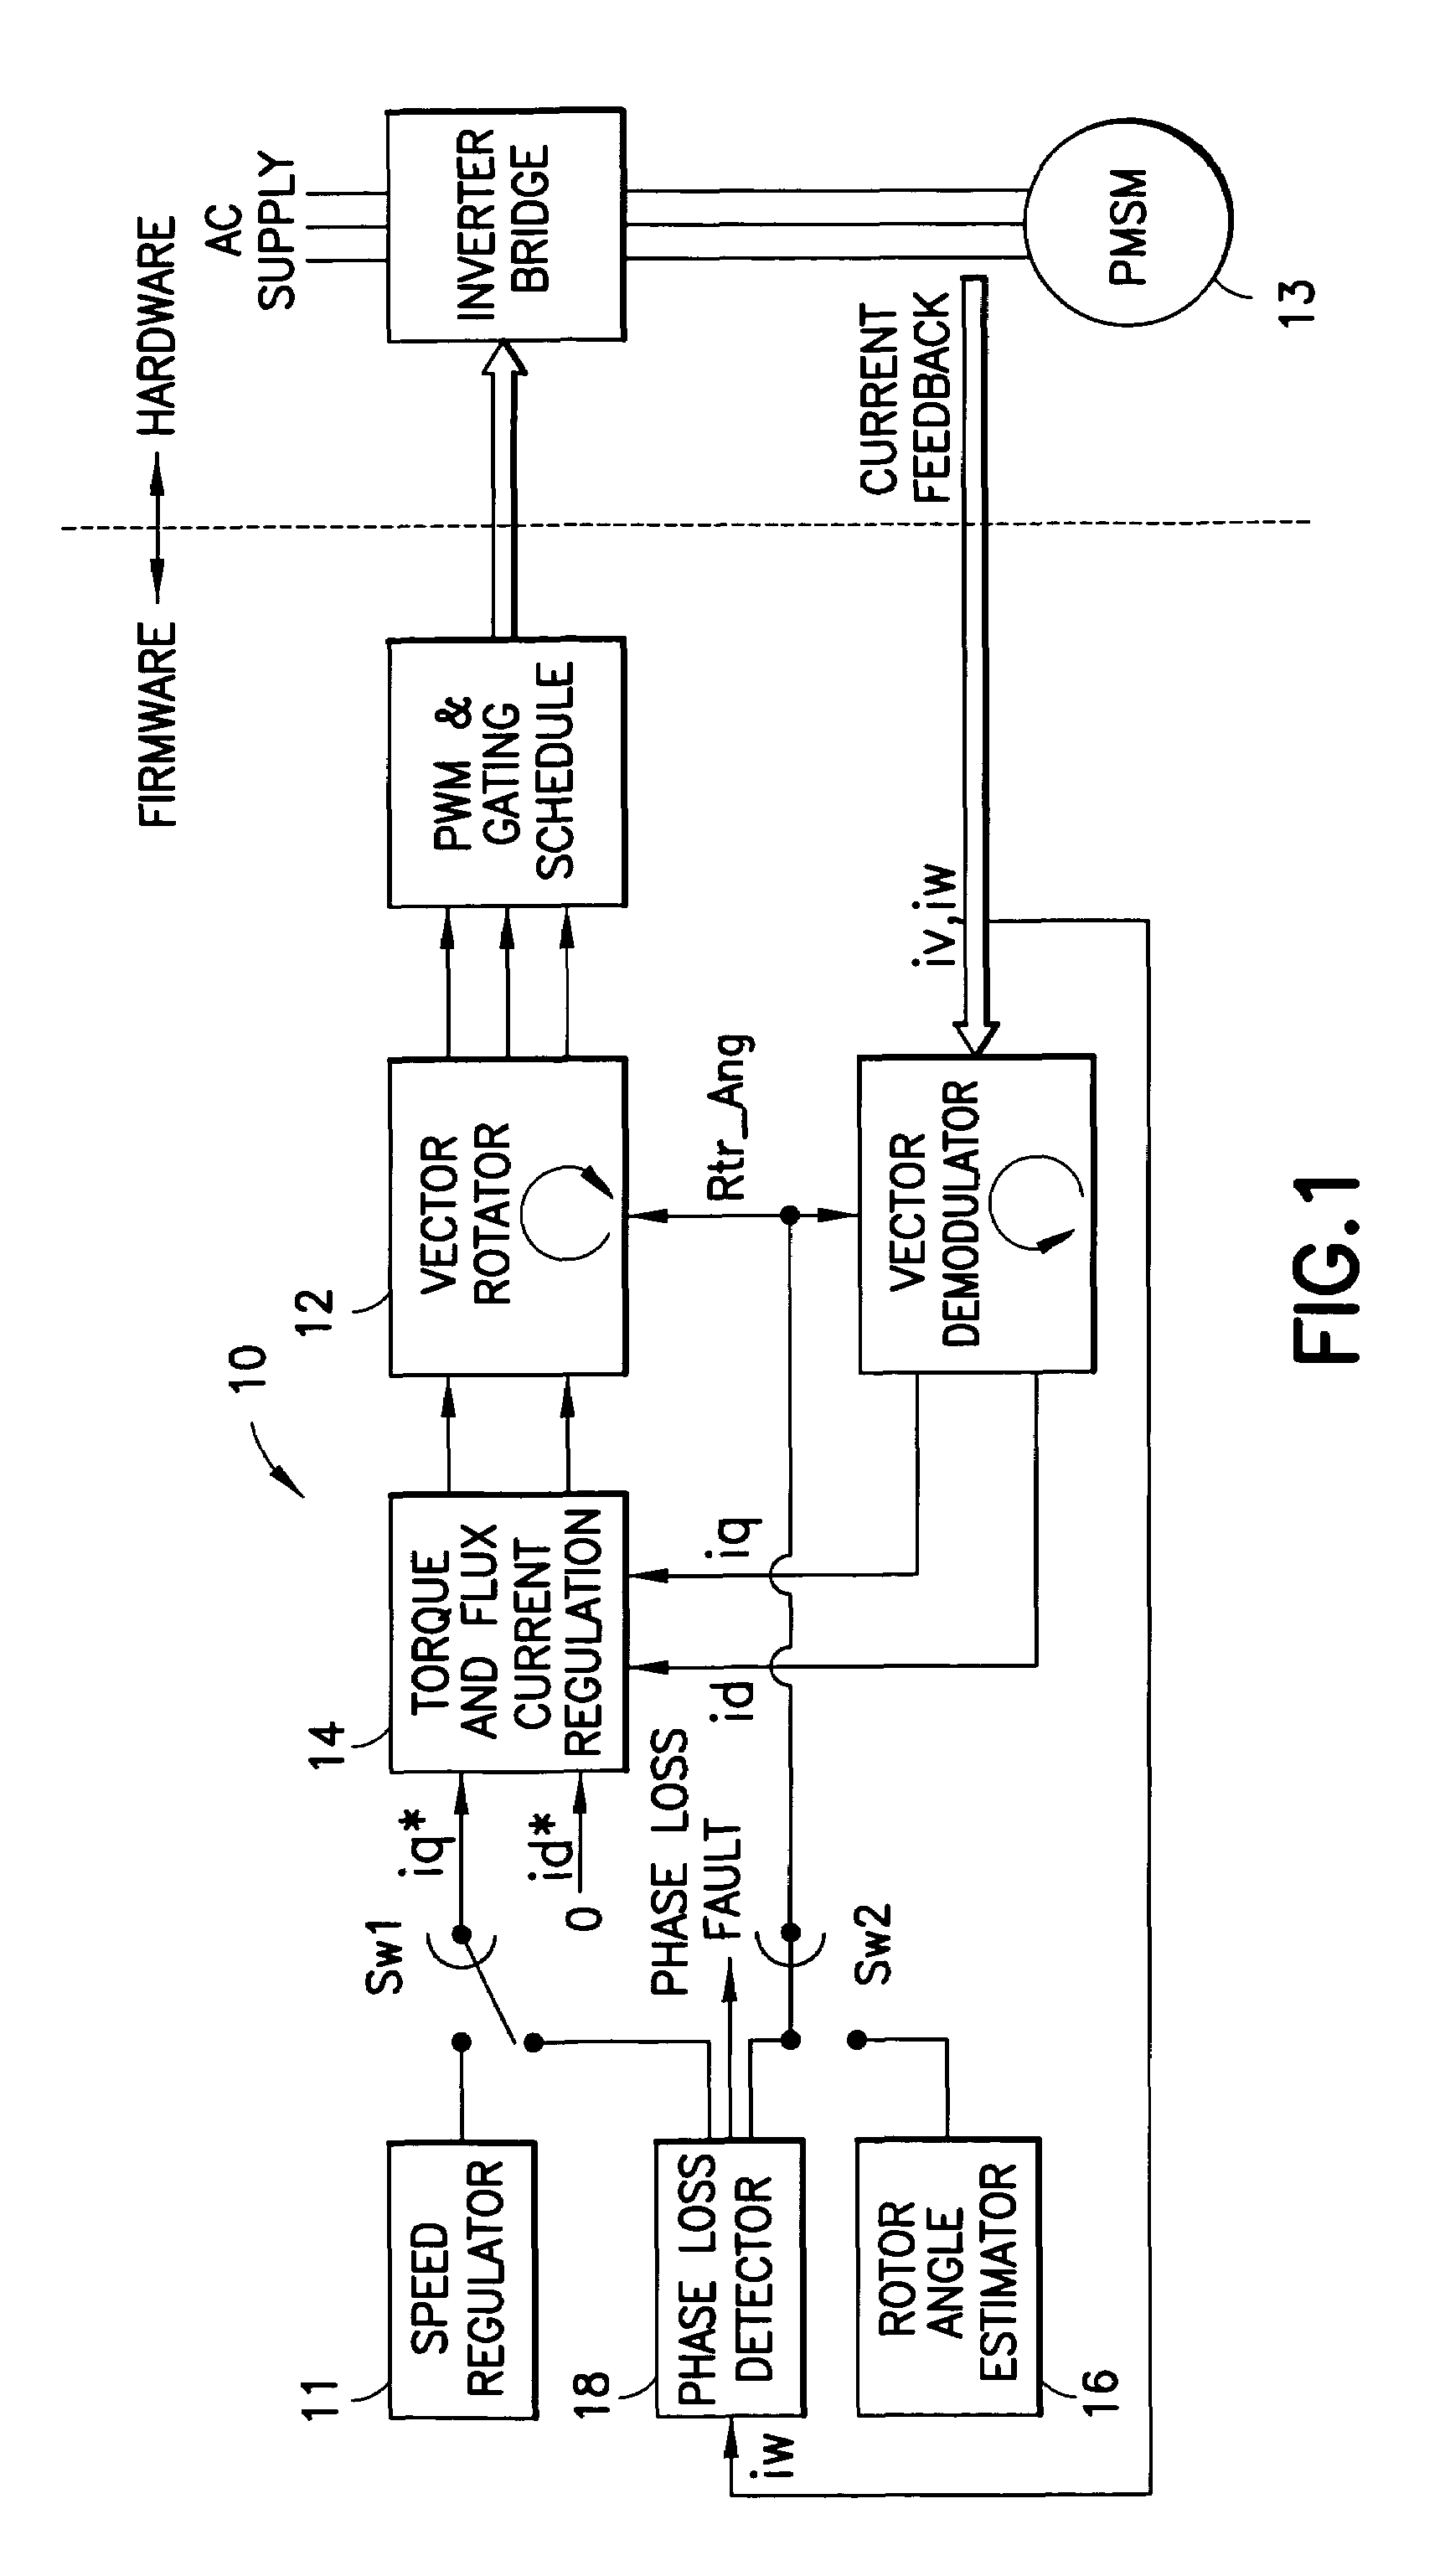 Phase-loss detection for rotating field machine